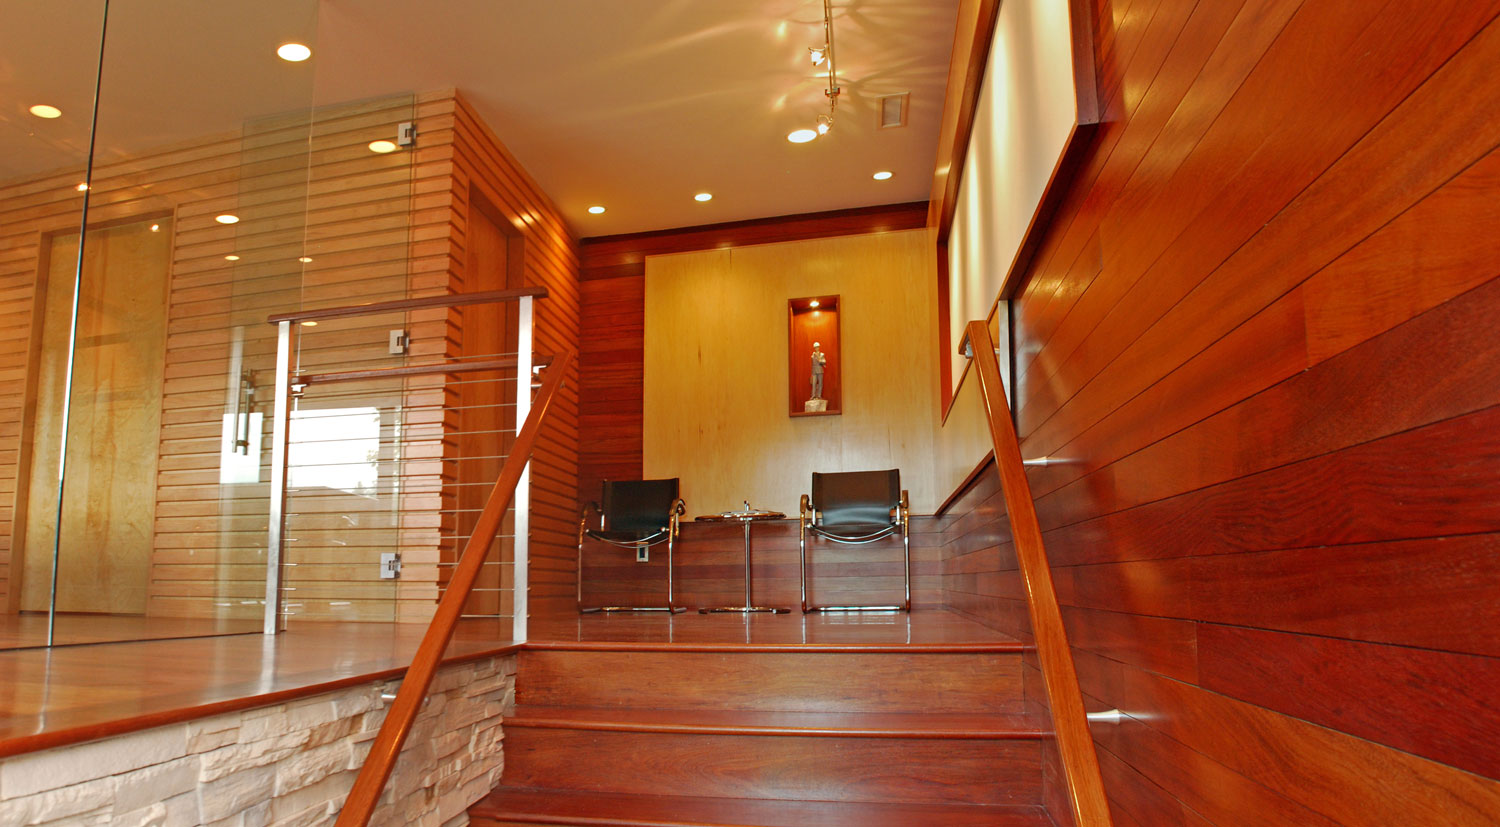 Pavelchak Architecture's entry staircase showcasing modern, clean design aesthetic with beautiful brazillian cherry and maple hardwoods.   Located in downtown Banner Elk, North Carolina near Boone. 